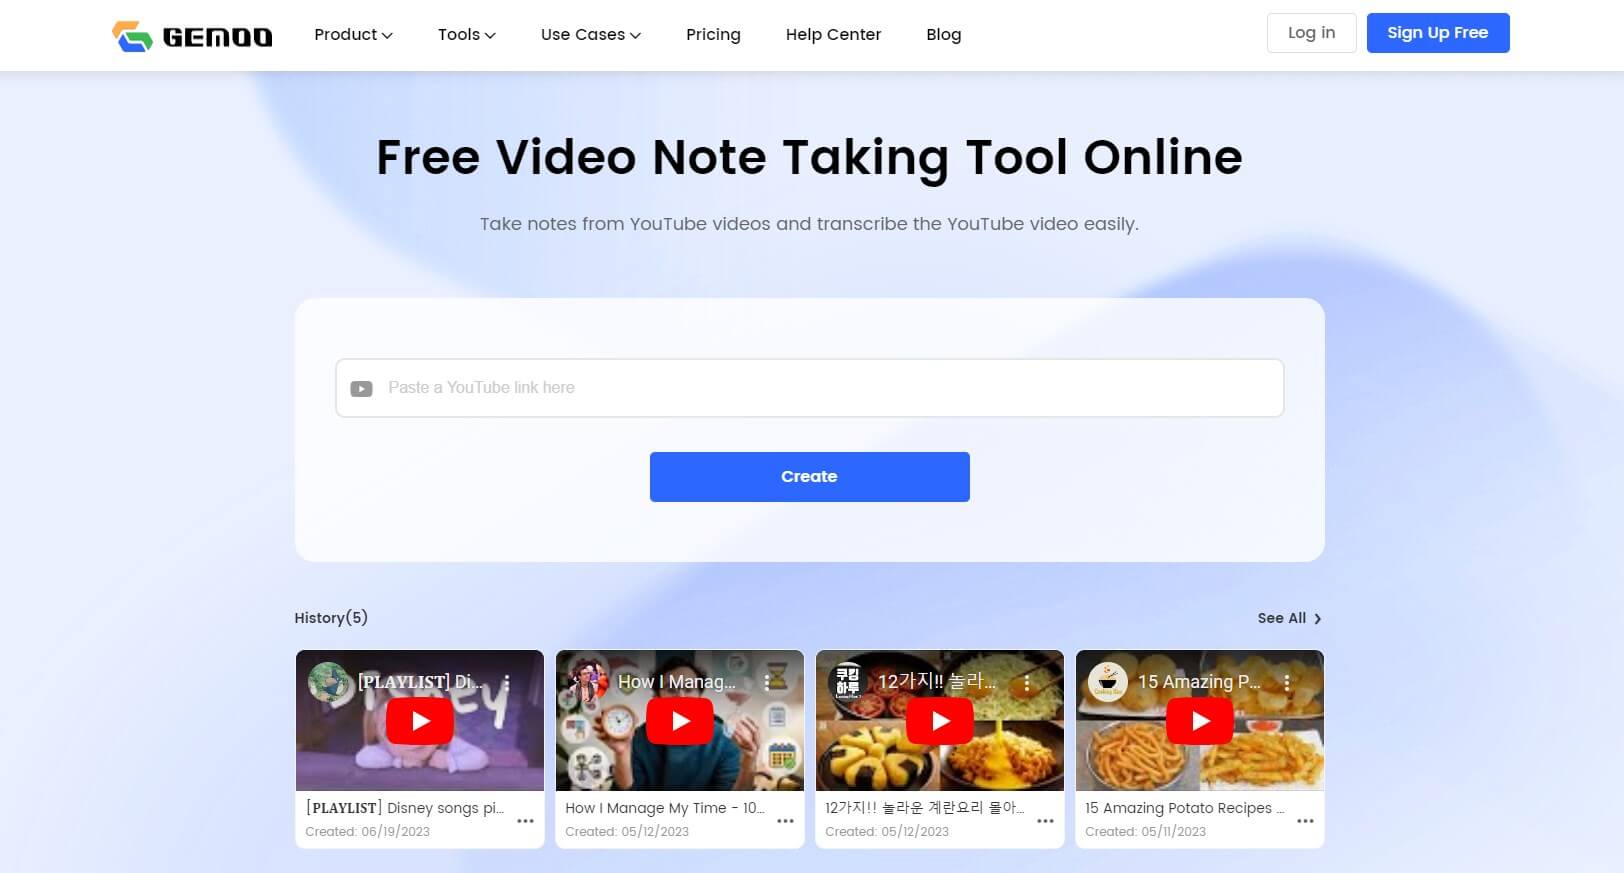 Gemoo's Online Video Note Taking Tool